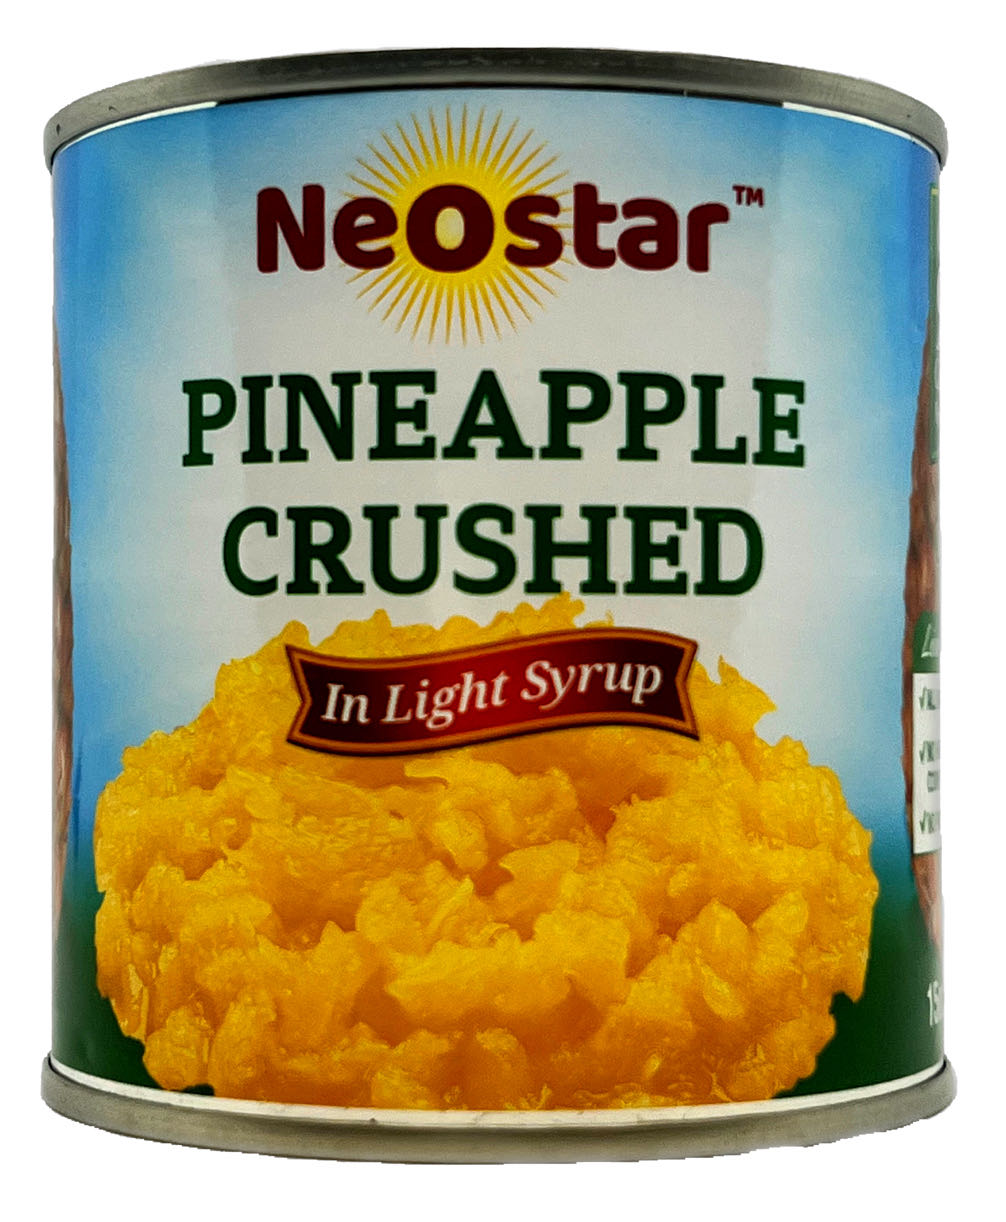 #1.5SQ (15oz) Pineapple Crushed, Light Syrup